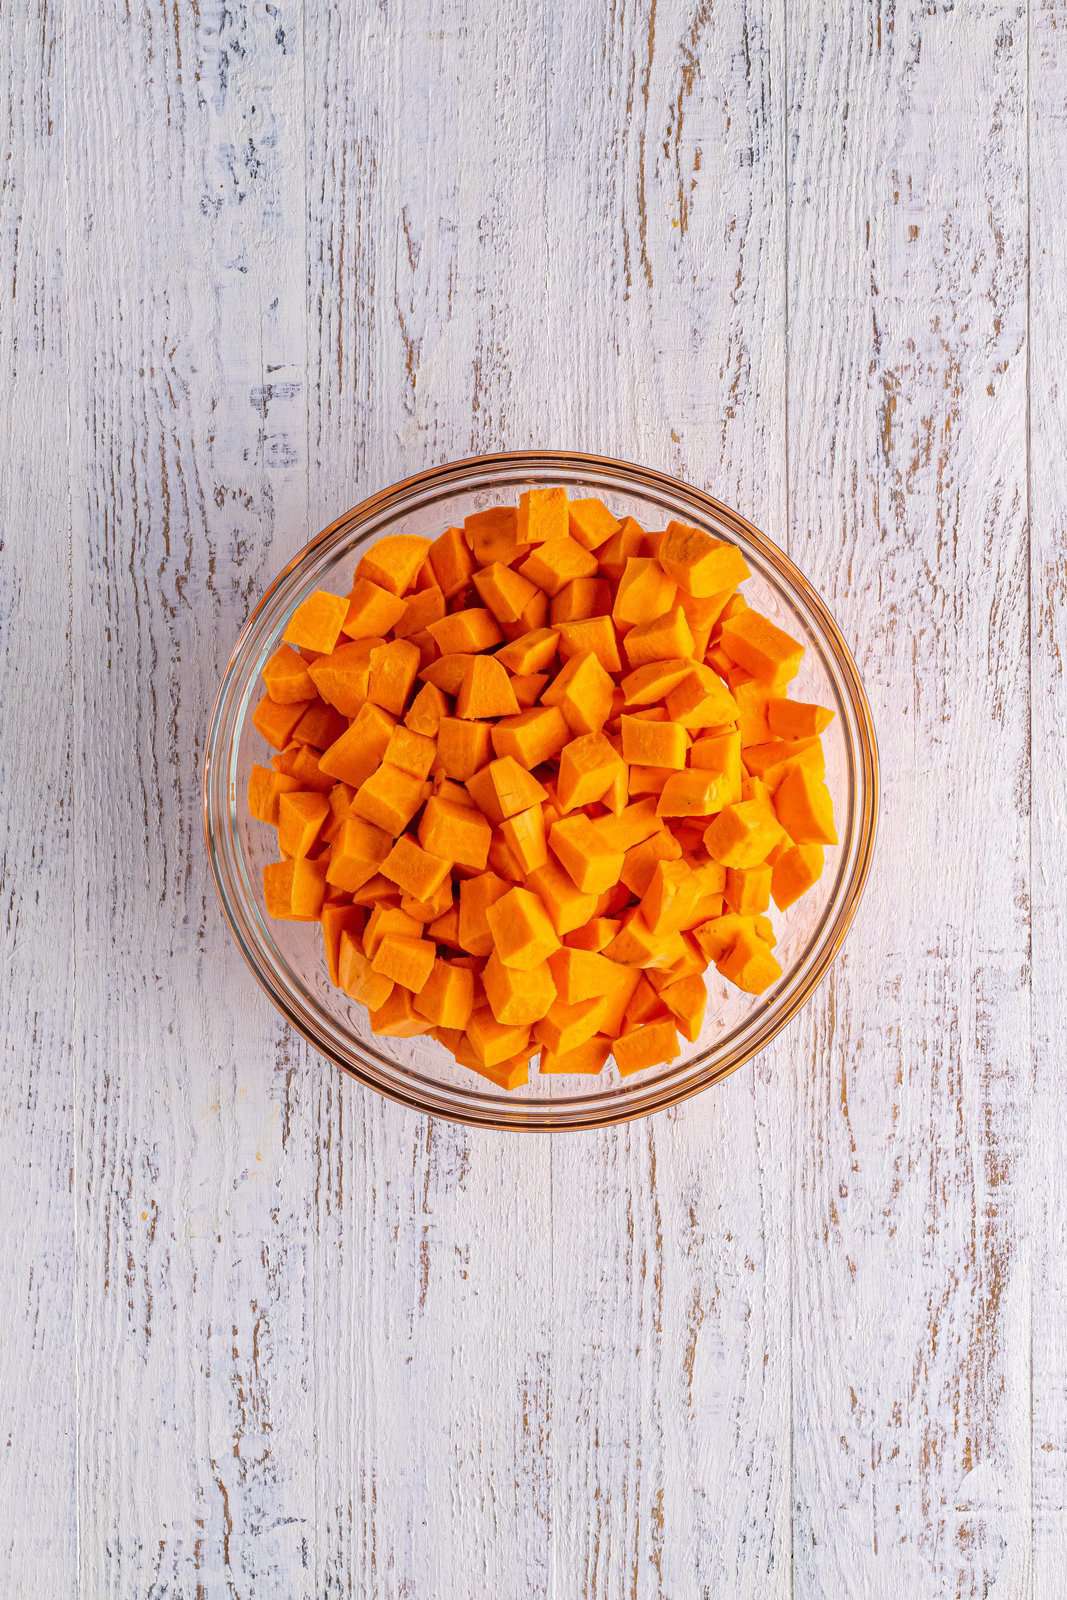 Diced sweet potatoes added to bowl.